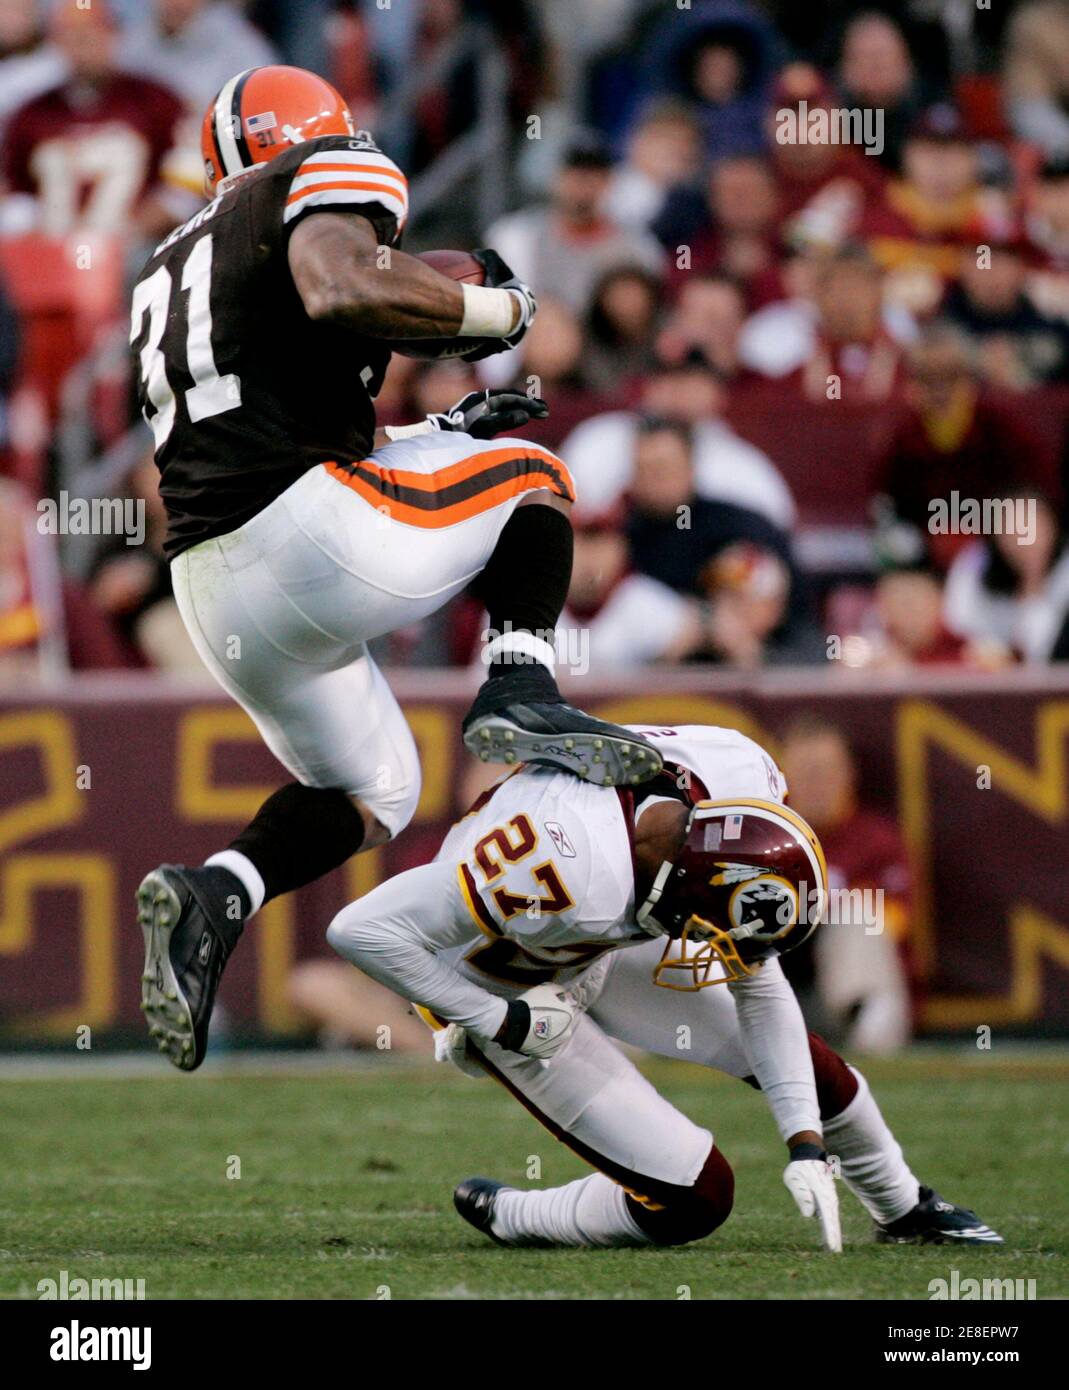 Cleveland Browns running back Jamal Lewis (L) hurdles Washington Redskins cornerback Fred Smoot (R) in the third quarter of their NFL football game in Landover, Maryland October 19, 2008.  REUTERS/Gary Cameron (UNITED STATES) Stock Photo